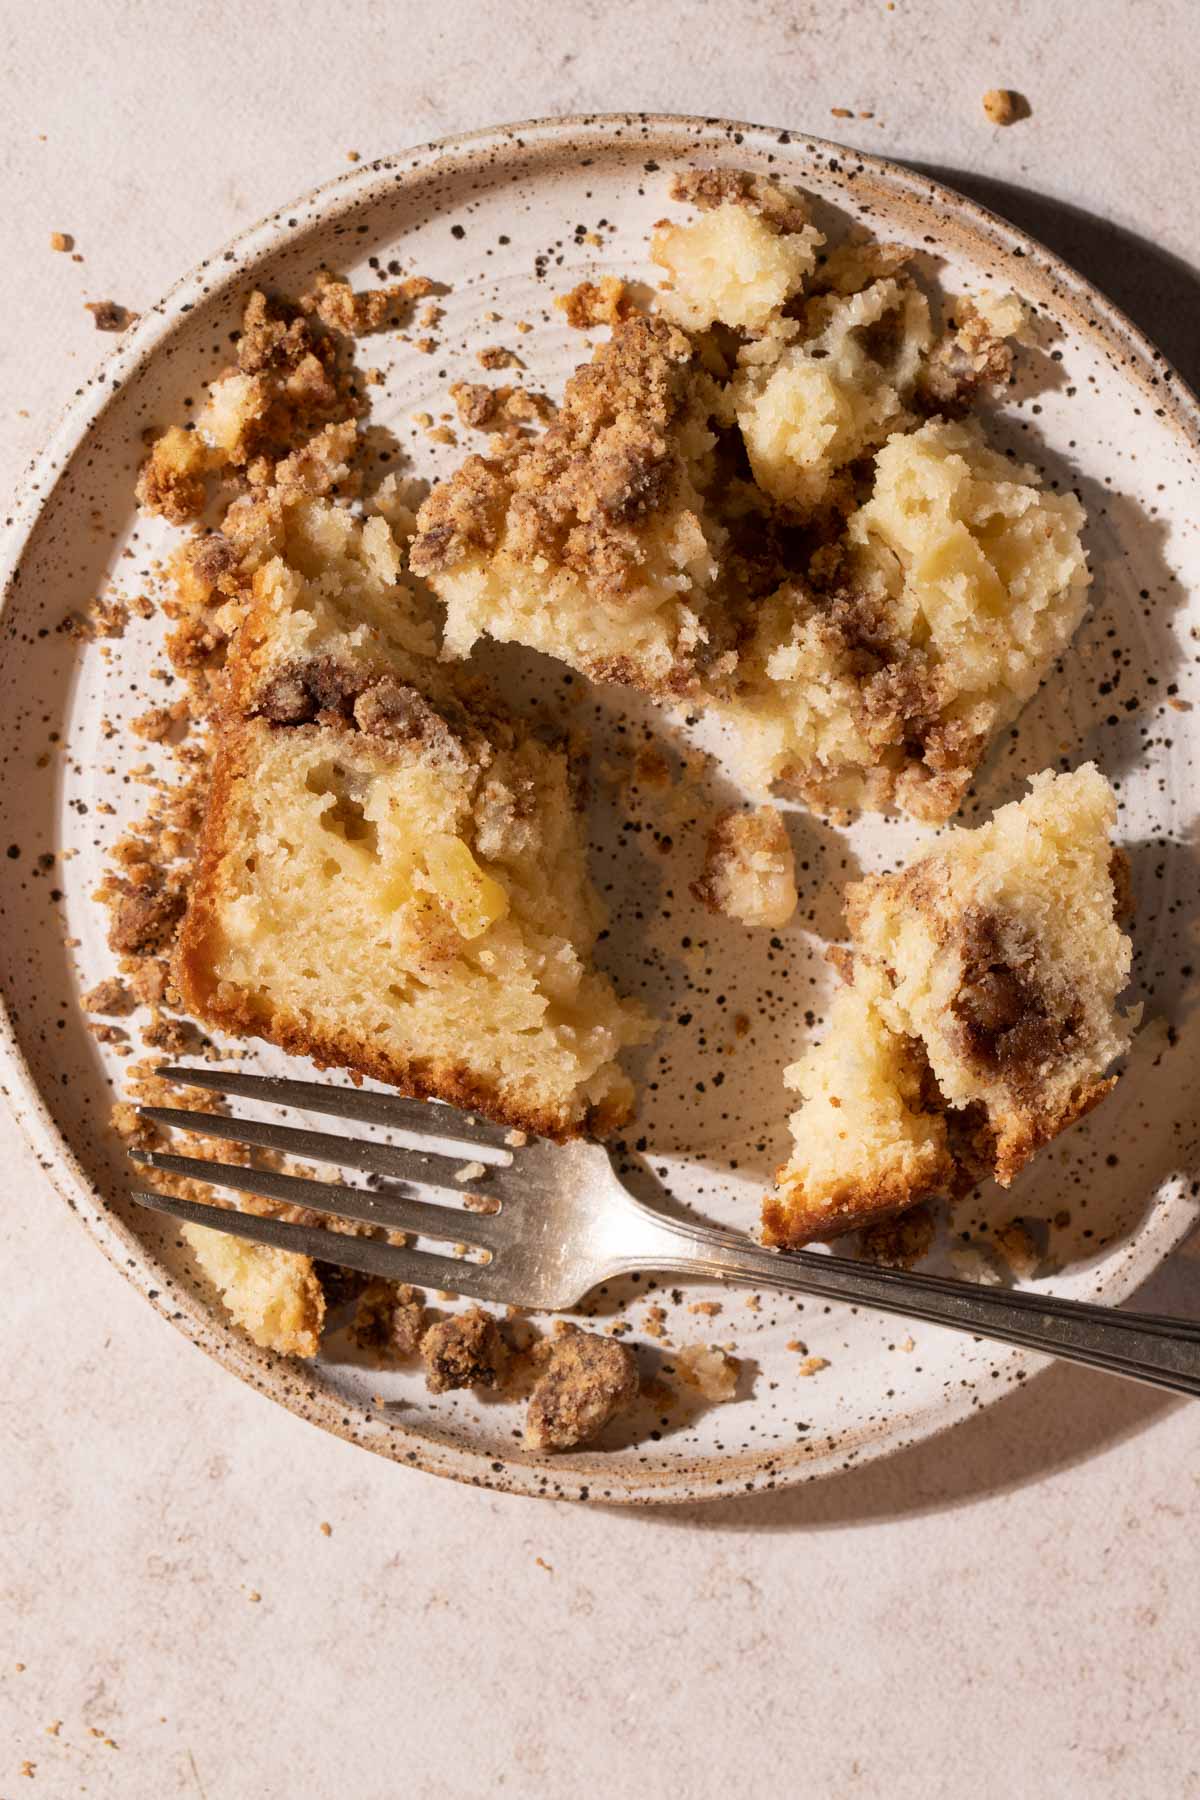 Pieces of apple streusel cake on plate with a fork